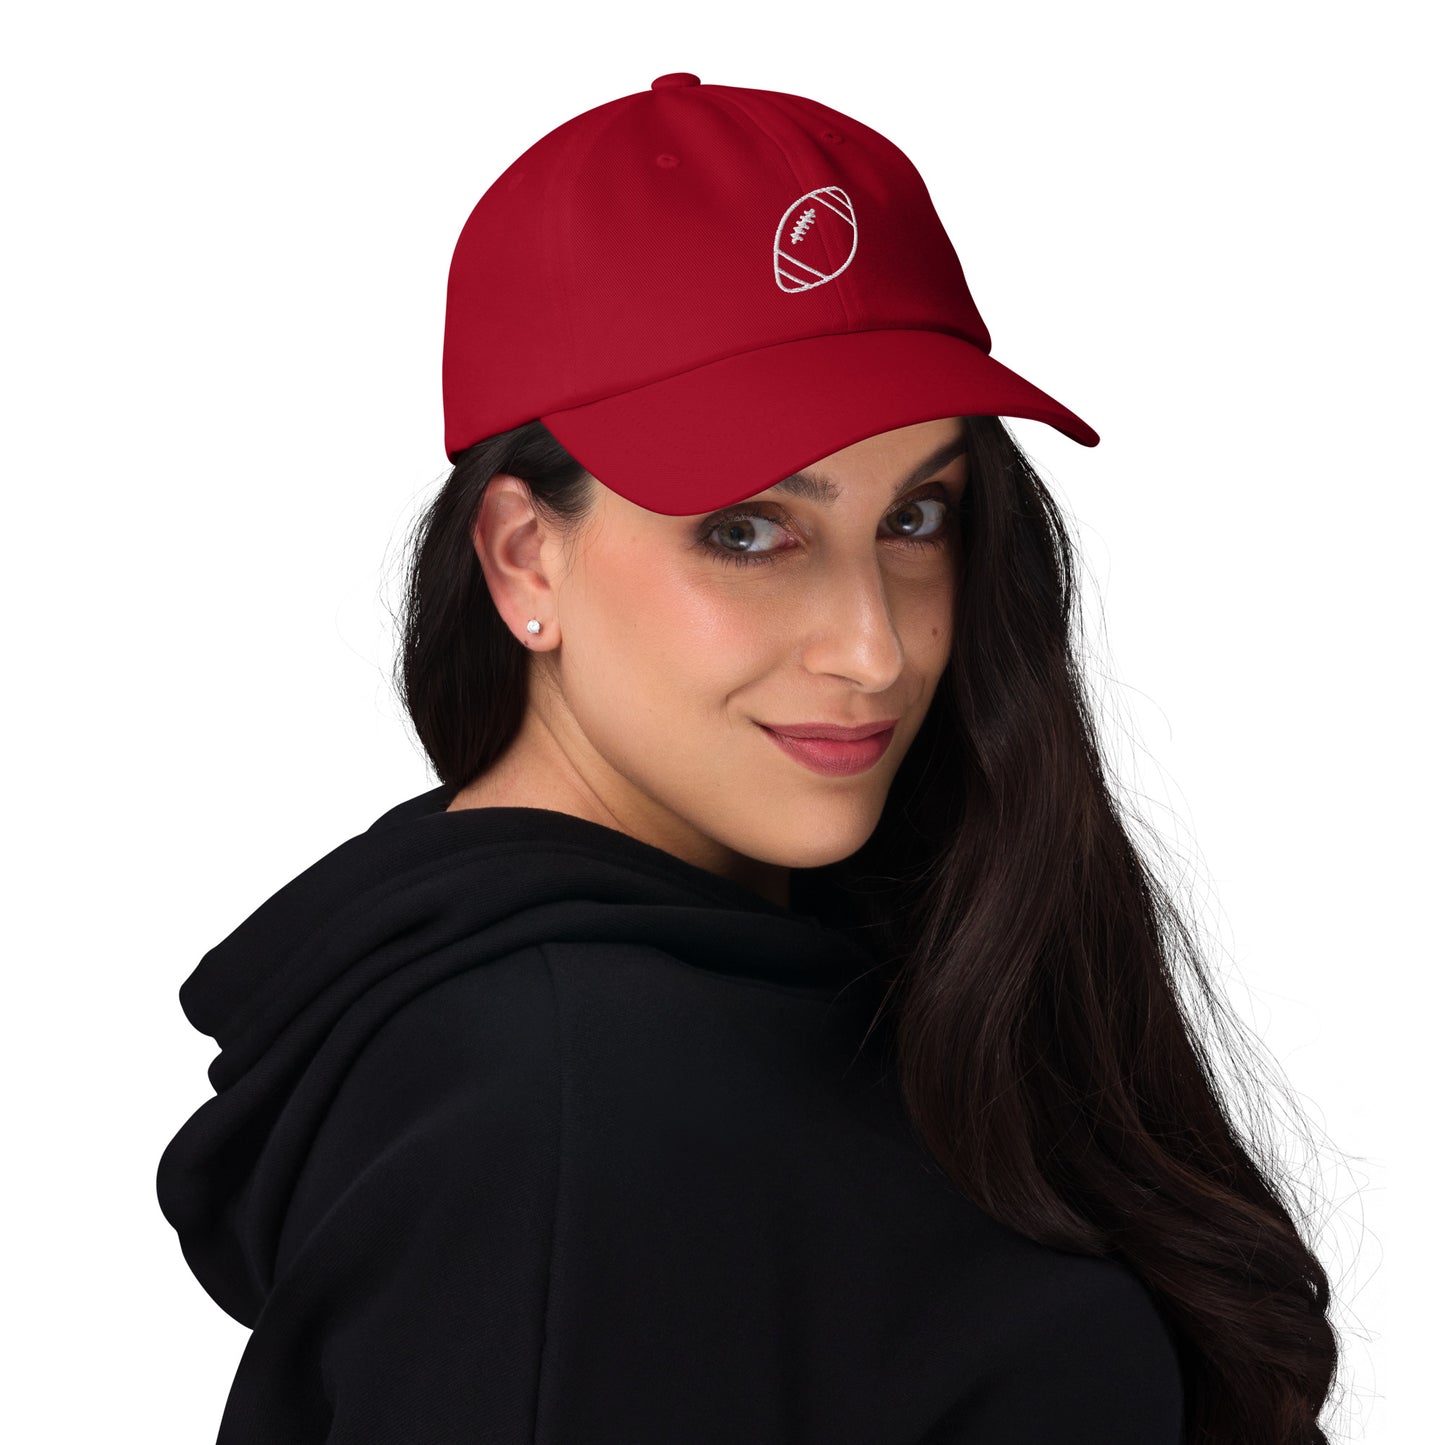 women with red baseball cap with football